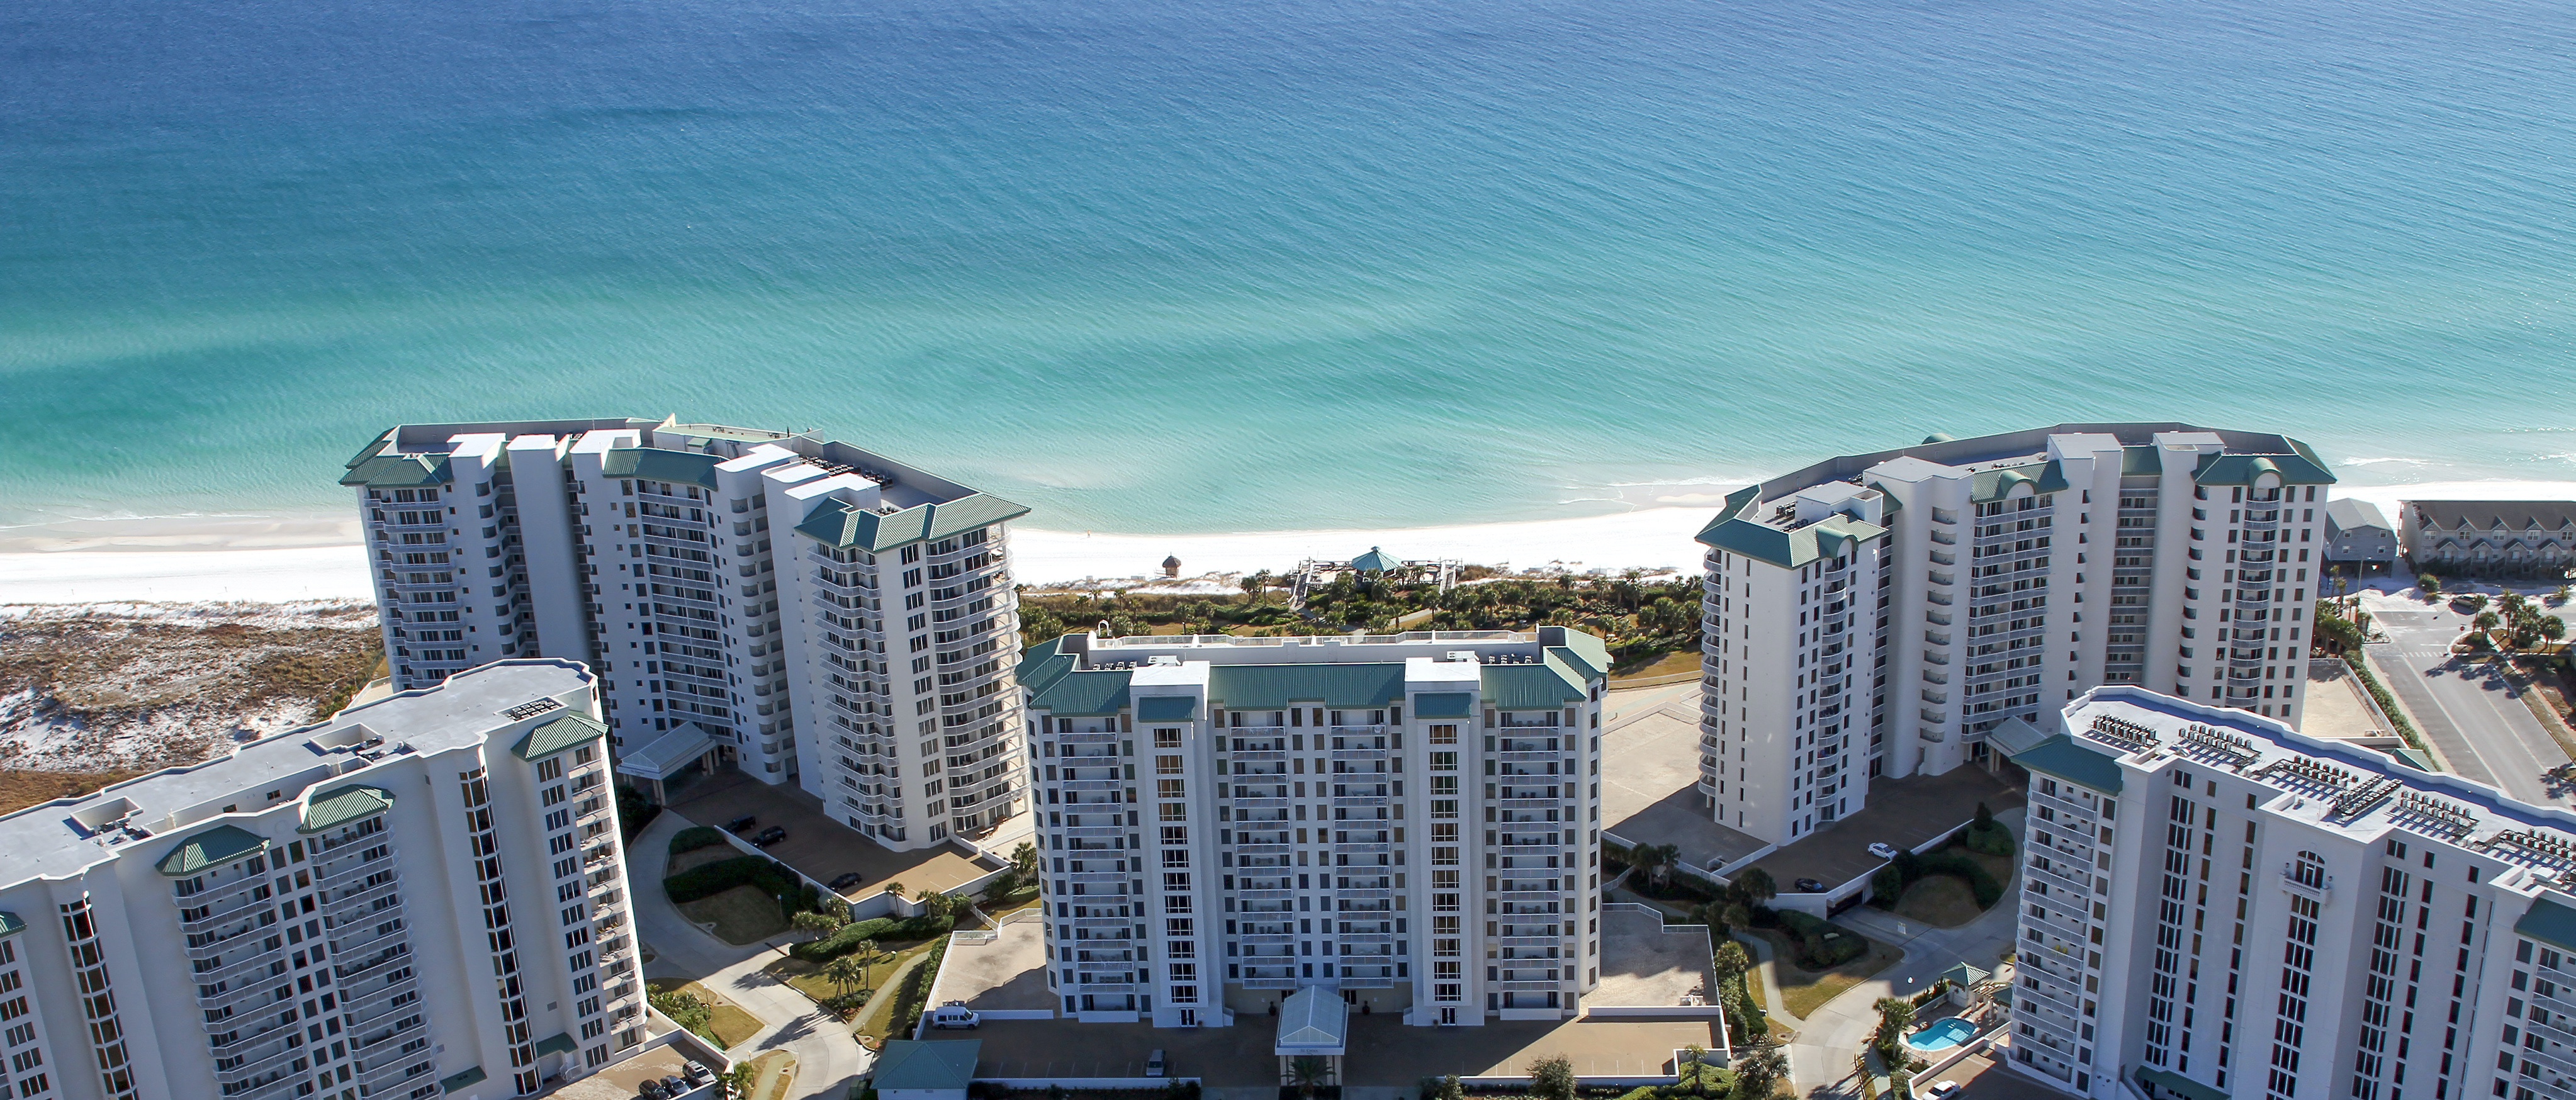 An aerial view of the Gulf front Silver Shells condominium in Destin